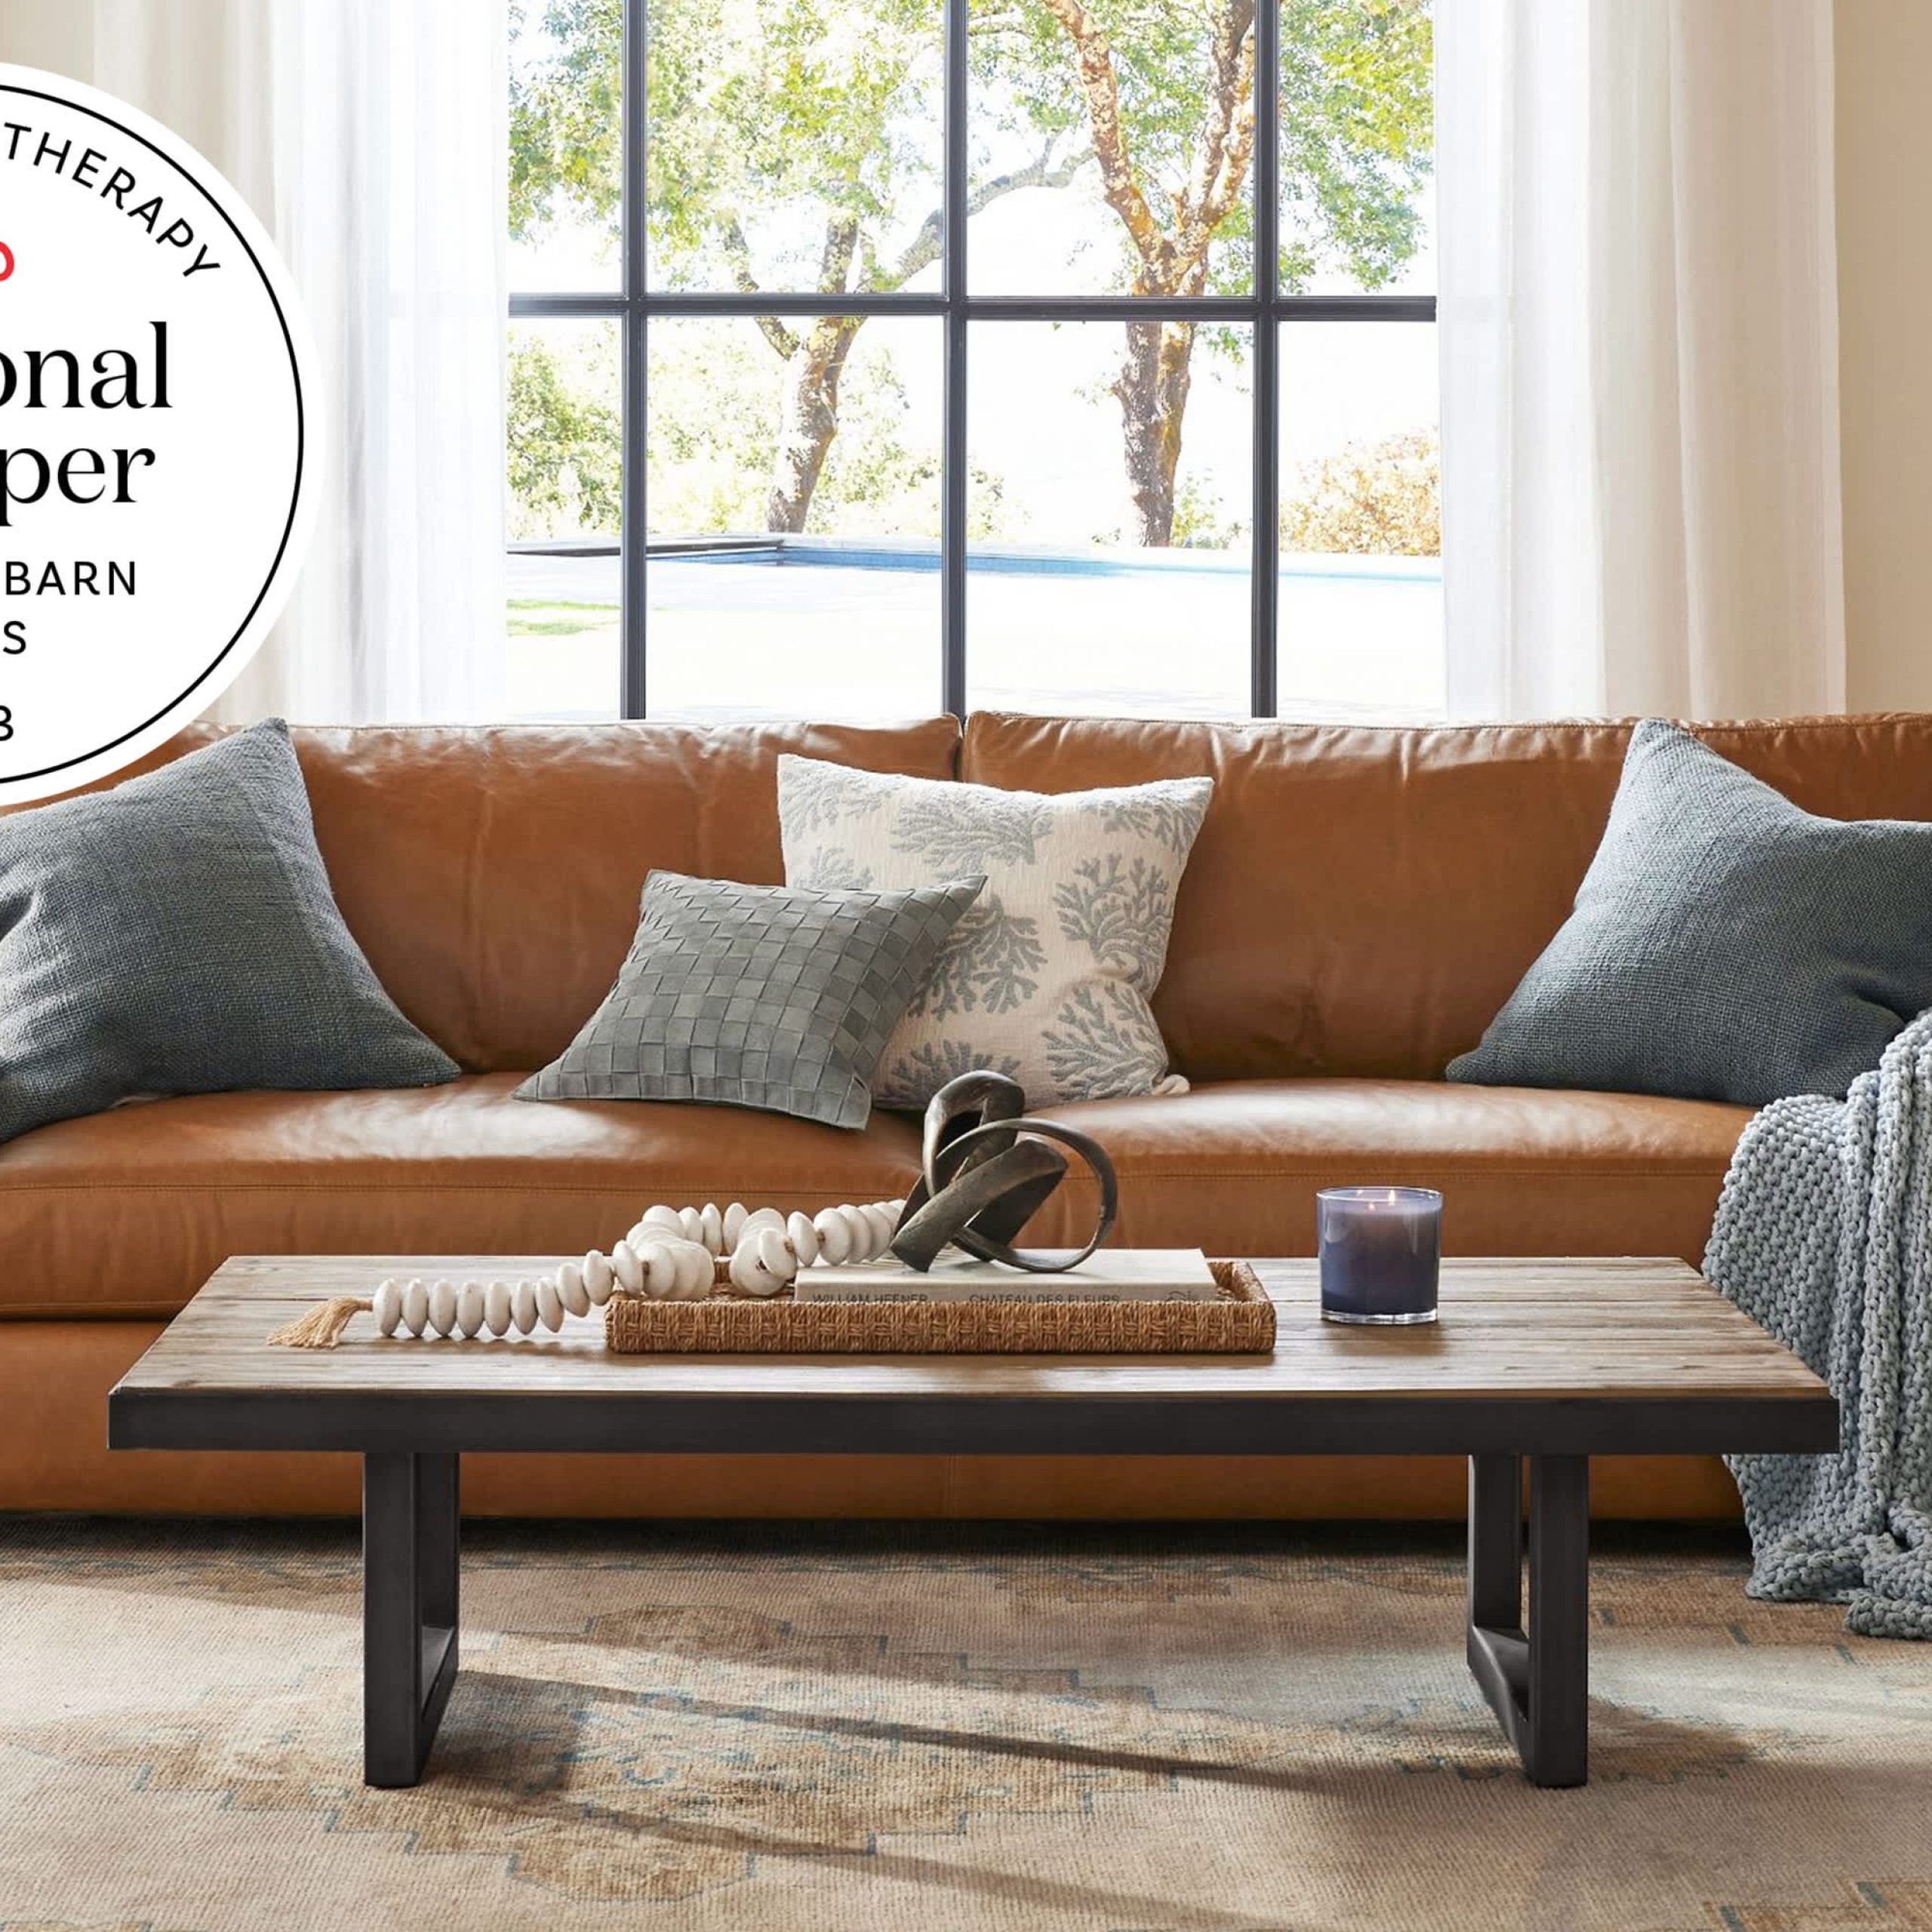 We Tested (And Rated!) All Pottery Barn Sofas And Sectionals For 2023 |  Apartment Therapy For Sofas With Ottomans In Brown (View 15 of 15)